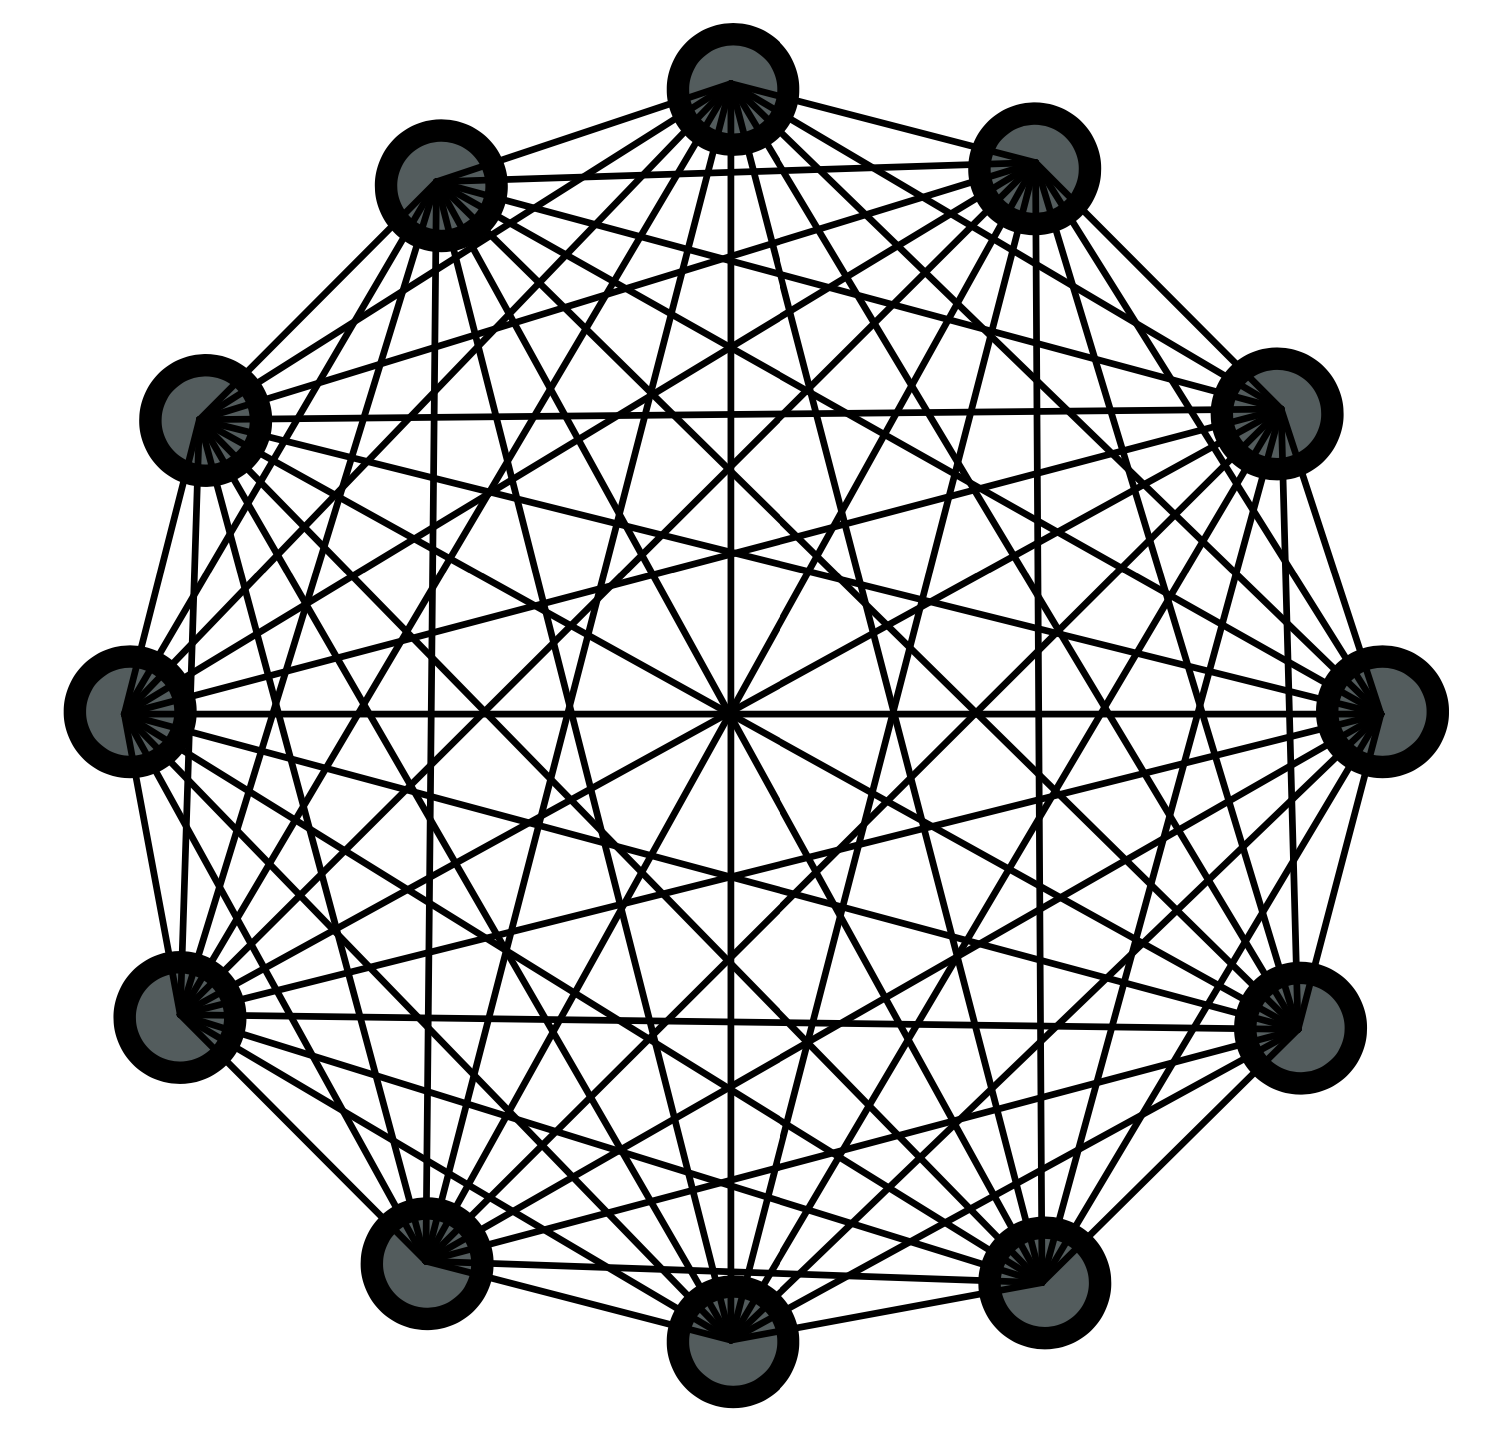 Complete graph on 12 vertices